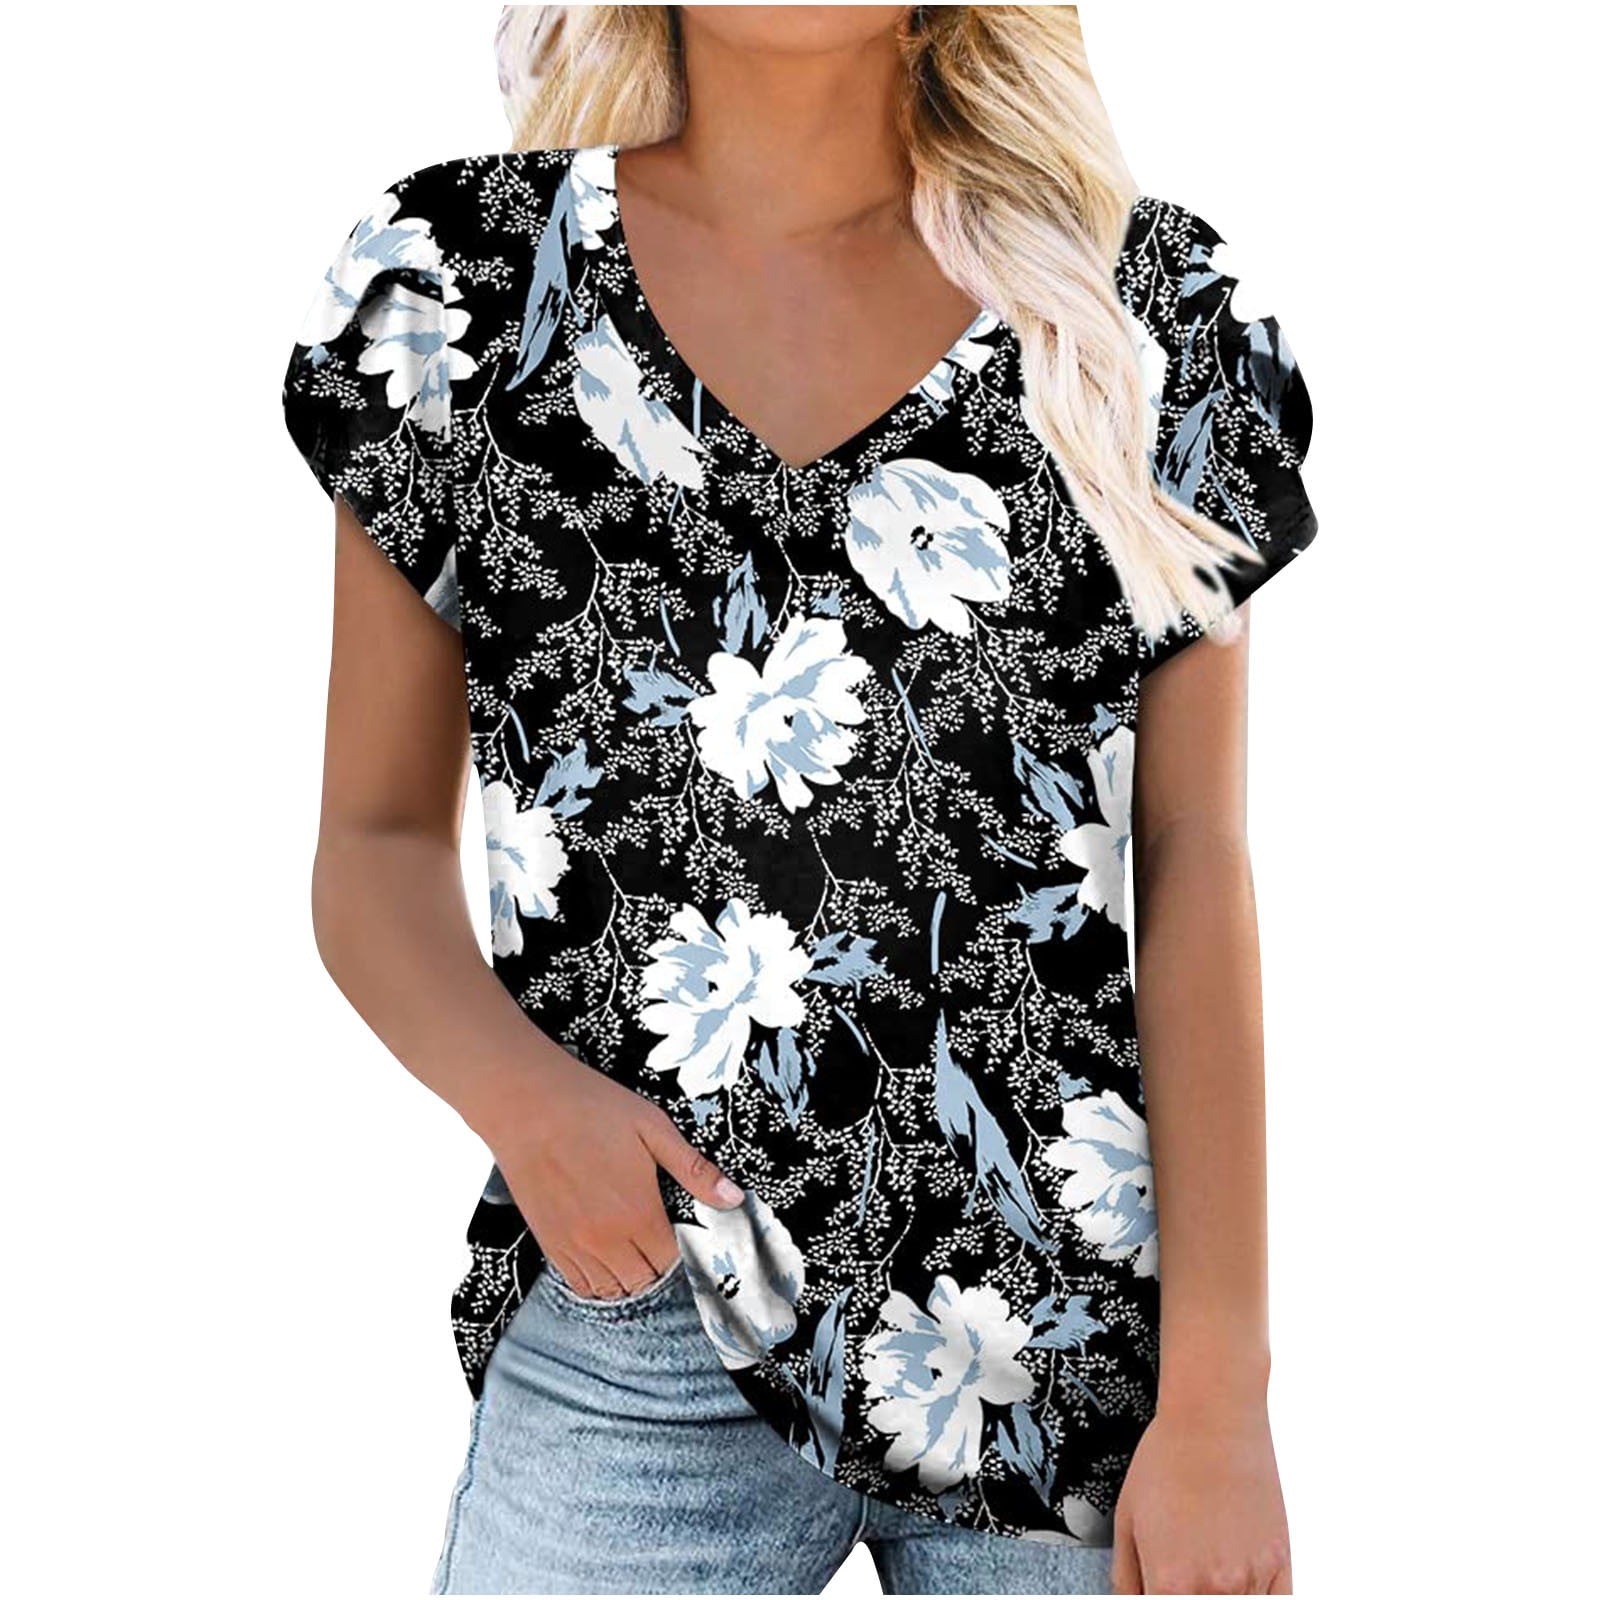 Perseo escucho música organizar Blouses for Women Fashion Oversized Shirts for Women,Women Floral Print  Blouse Short Sleeve Shirts Round Collar Y3k Top Blusas Para Mujer Casuales  Y Elegantes - Walmart.com